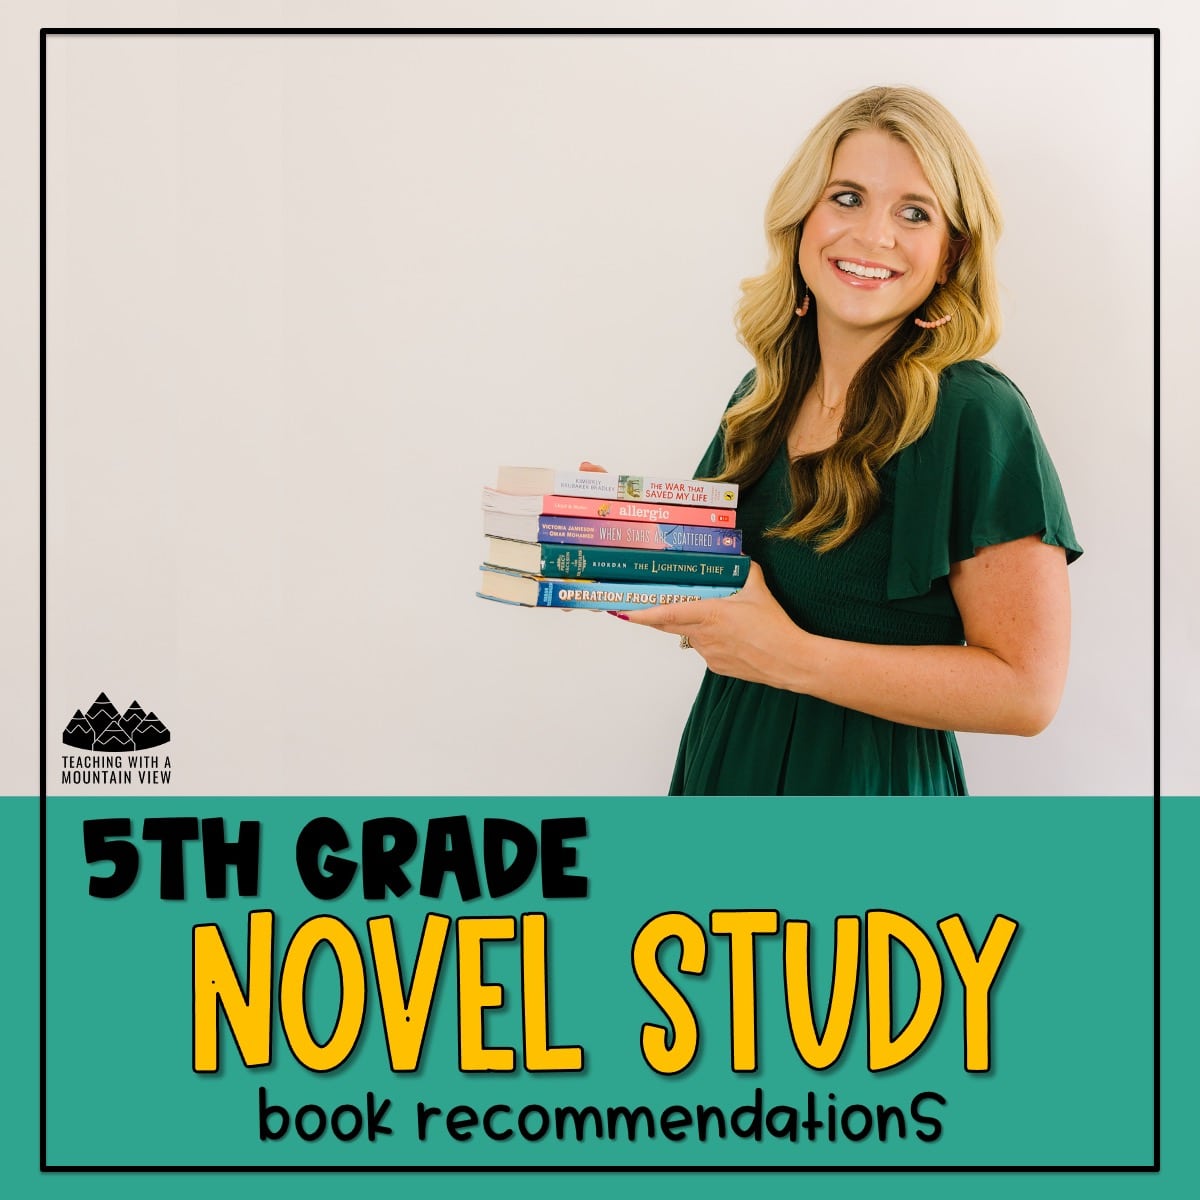 Make planning your next novel study easy with these 5th grade novel study books! These books will entertain and ignite a passion for reading.